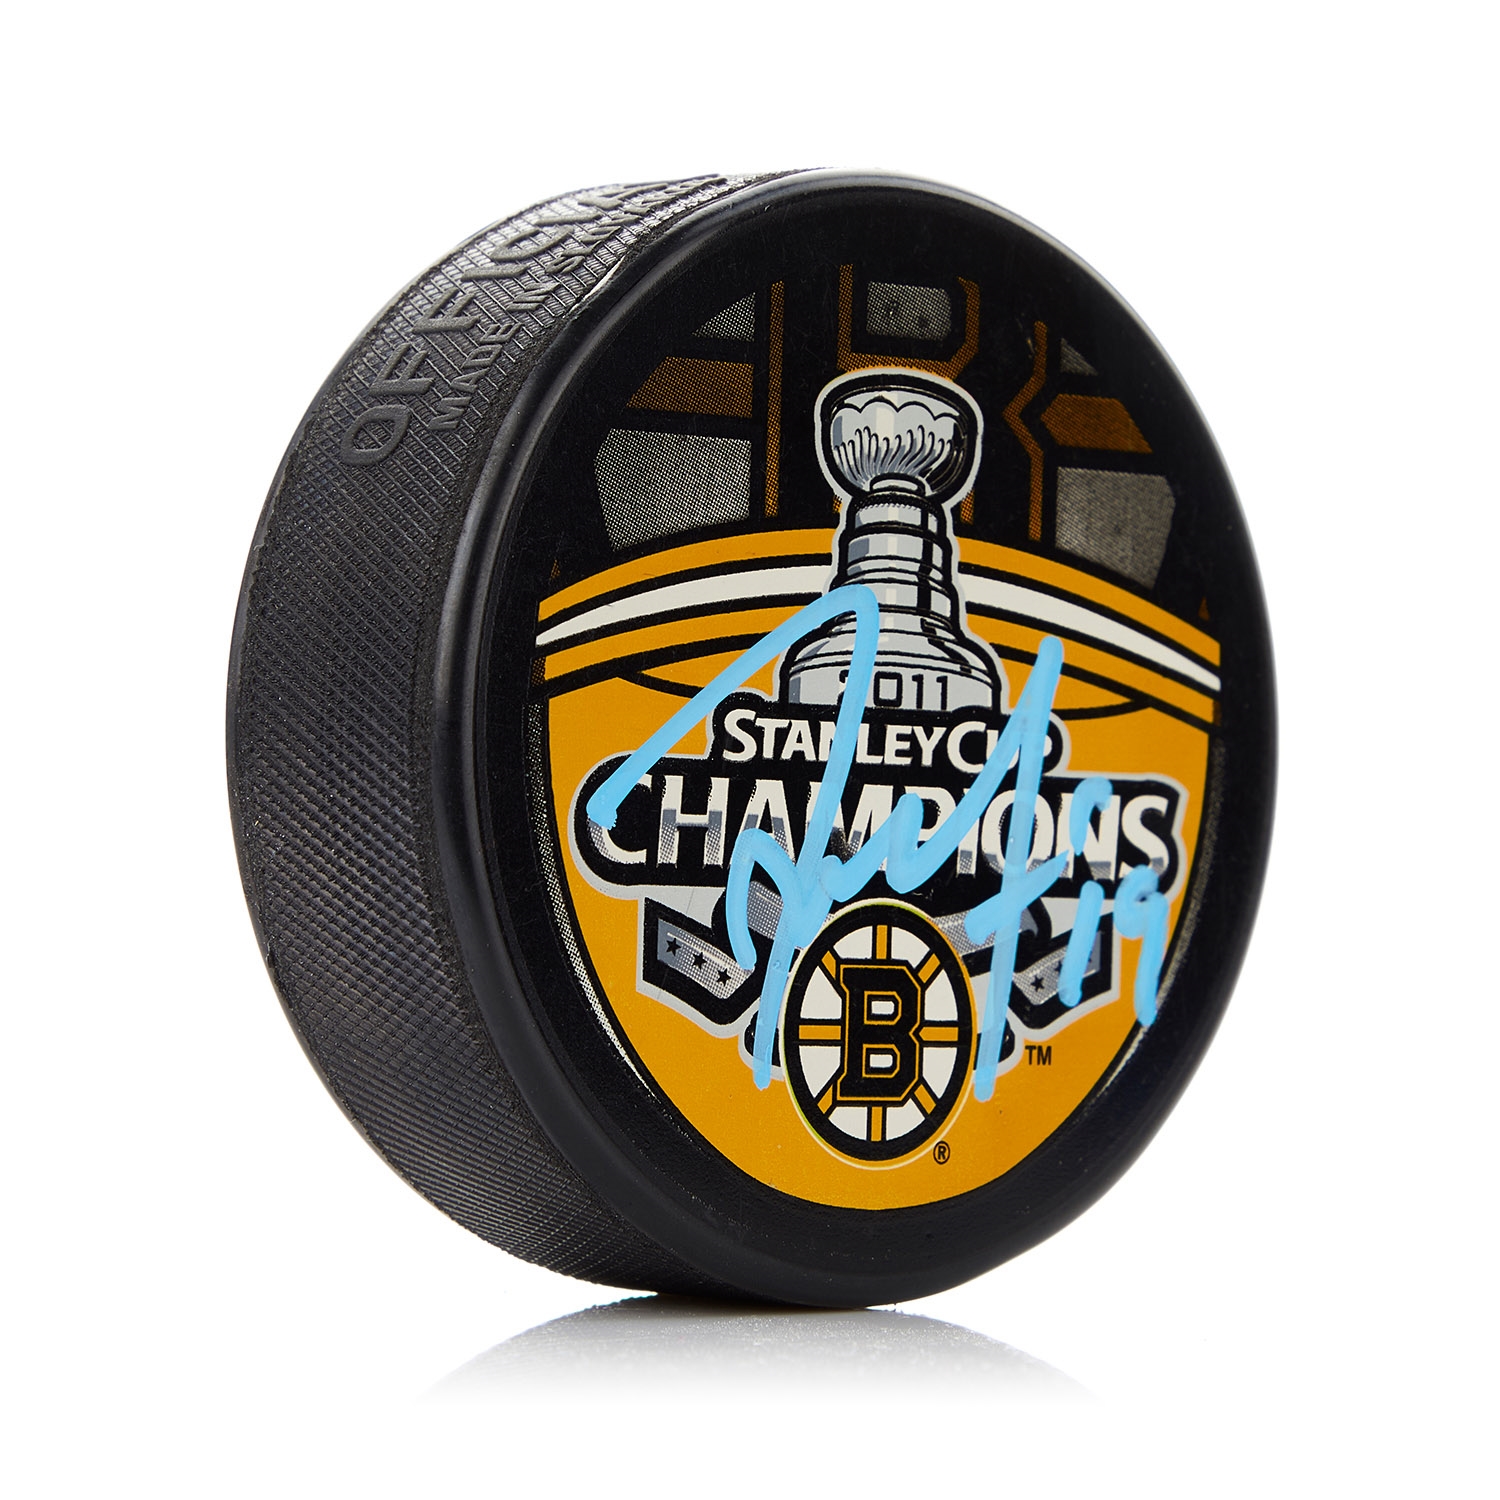 Tyler Seguin Boston Bruins Signed 2011 Stanley Cup Puck